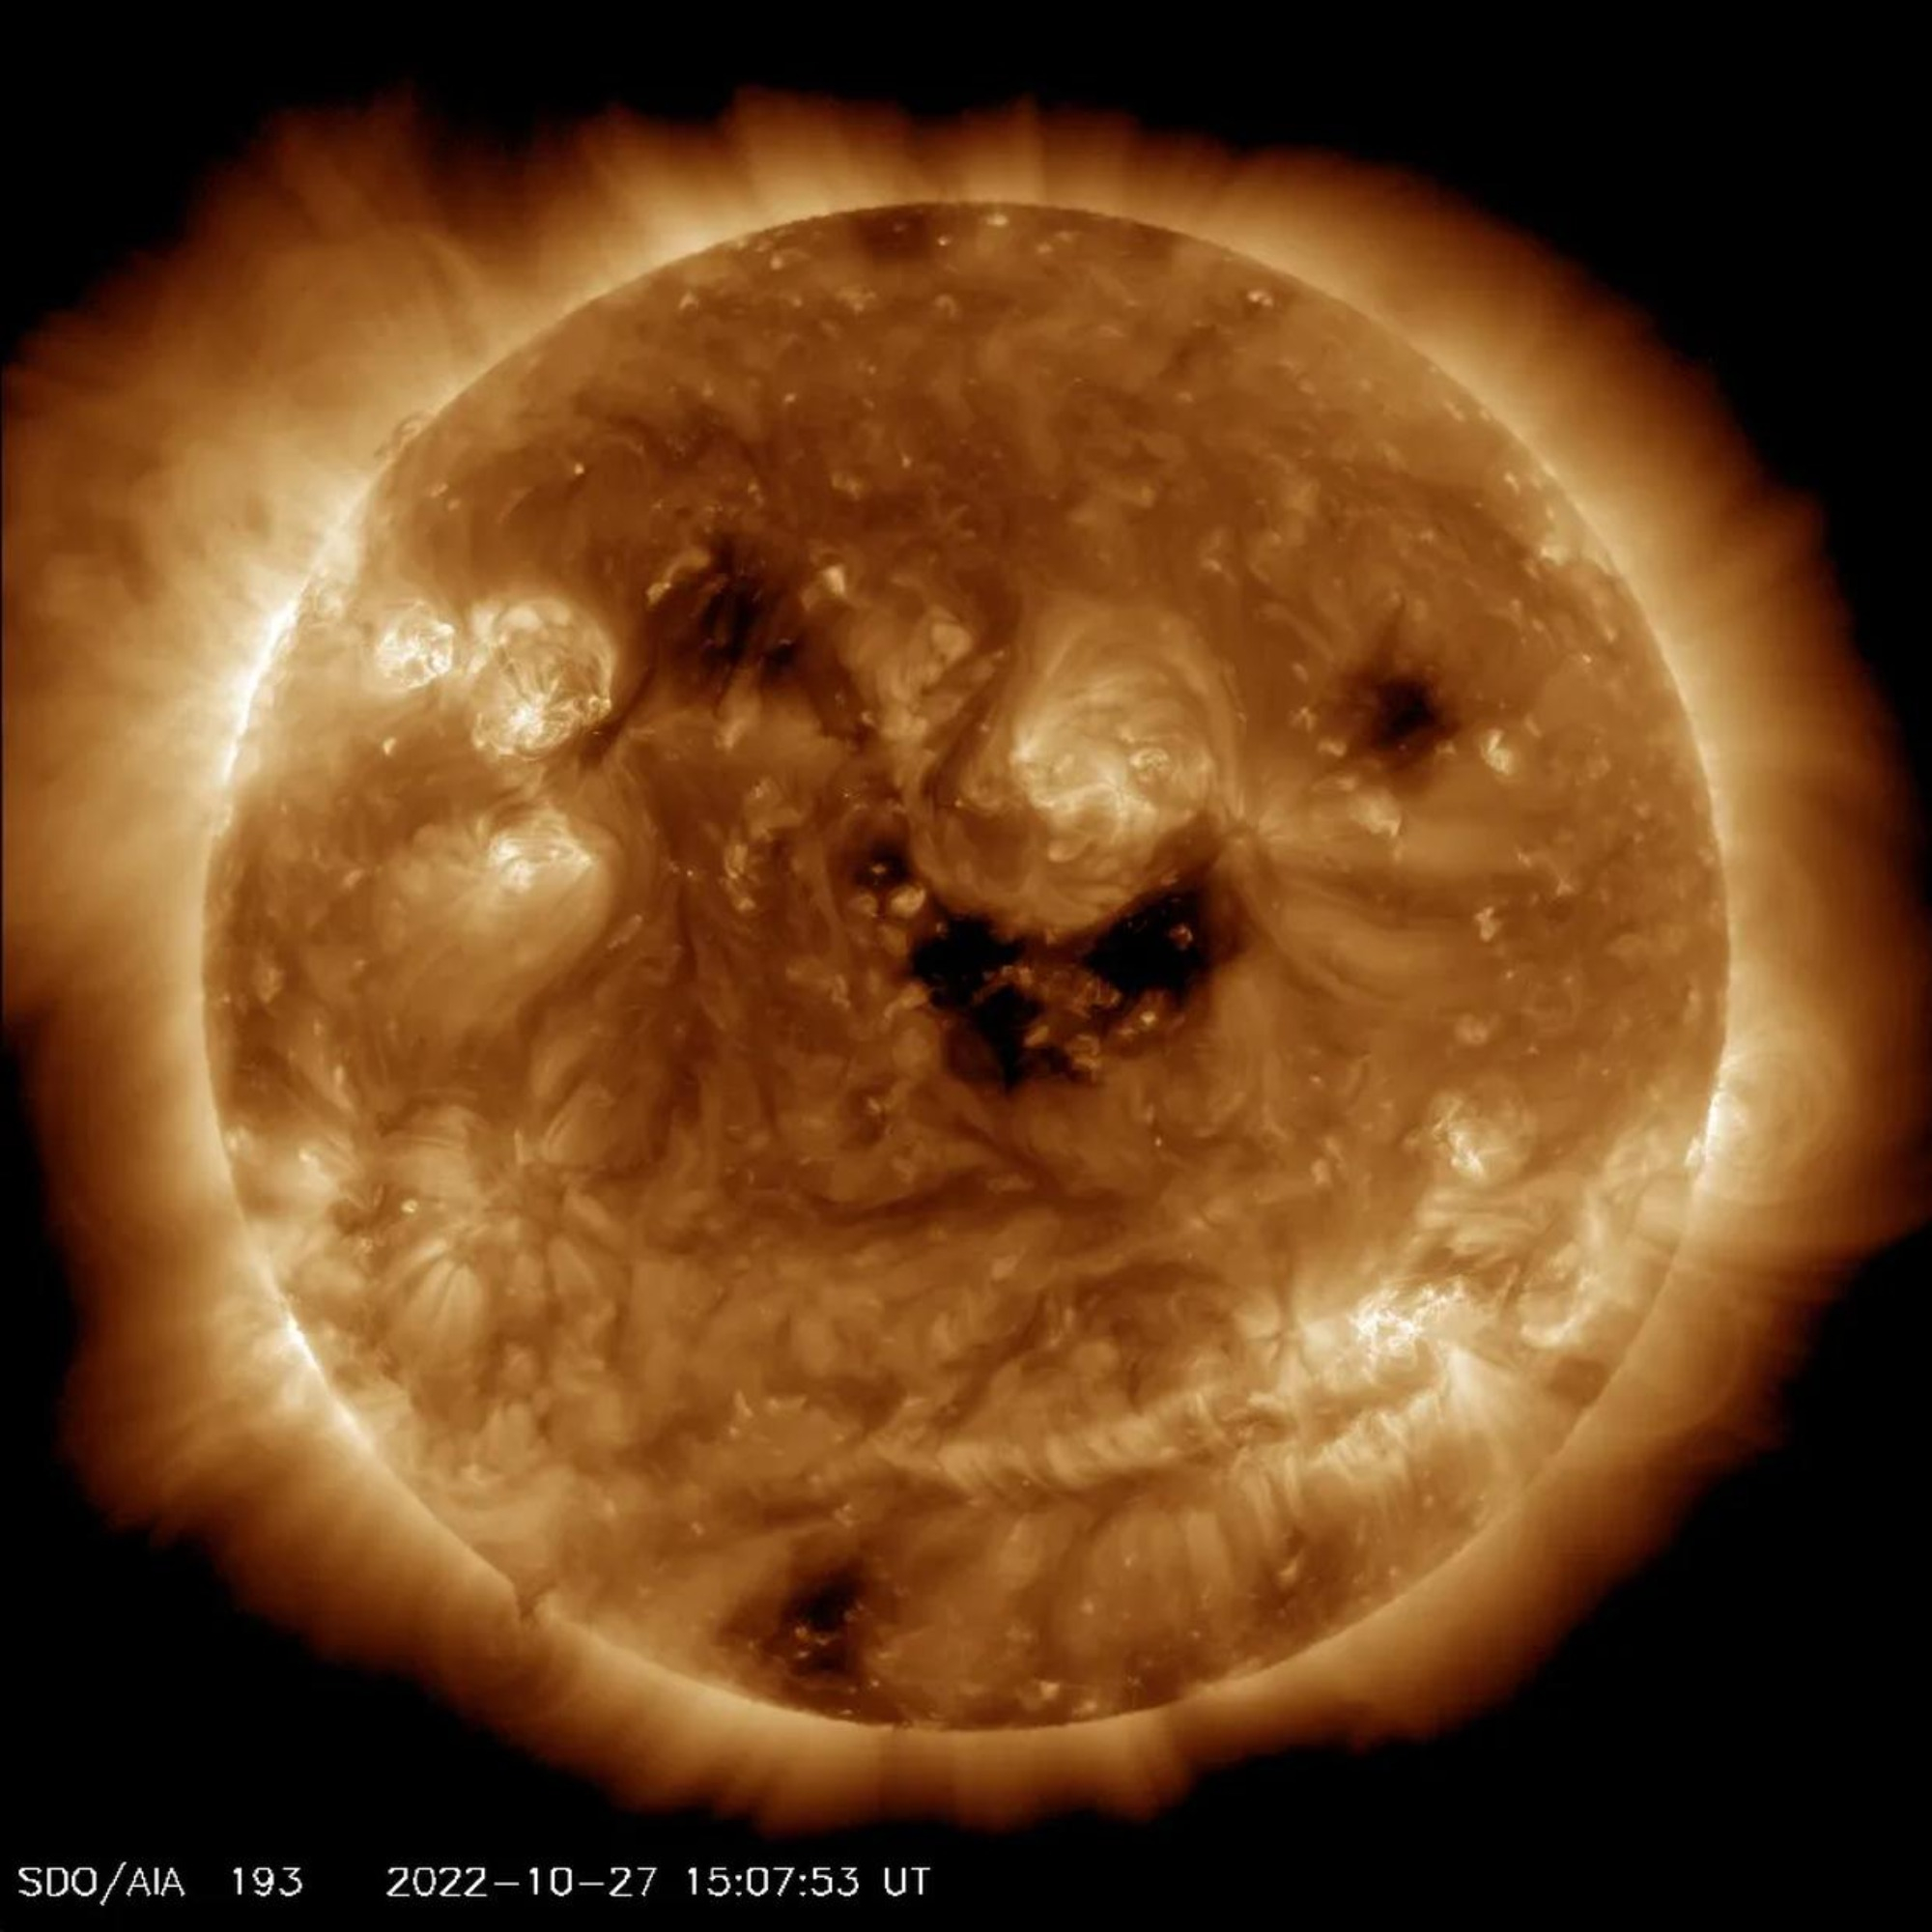 Just in time for Halloween, the sun looks like a jack-o’-lantern